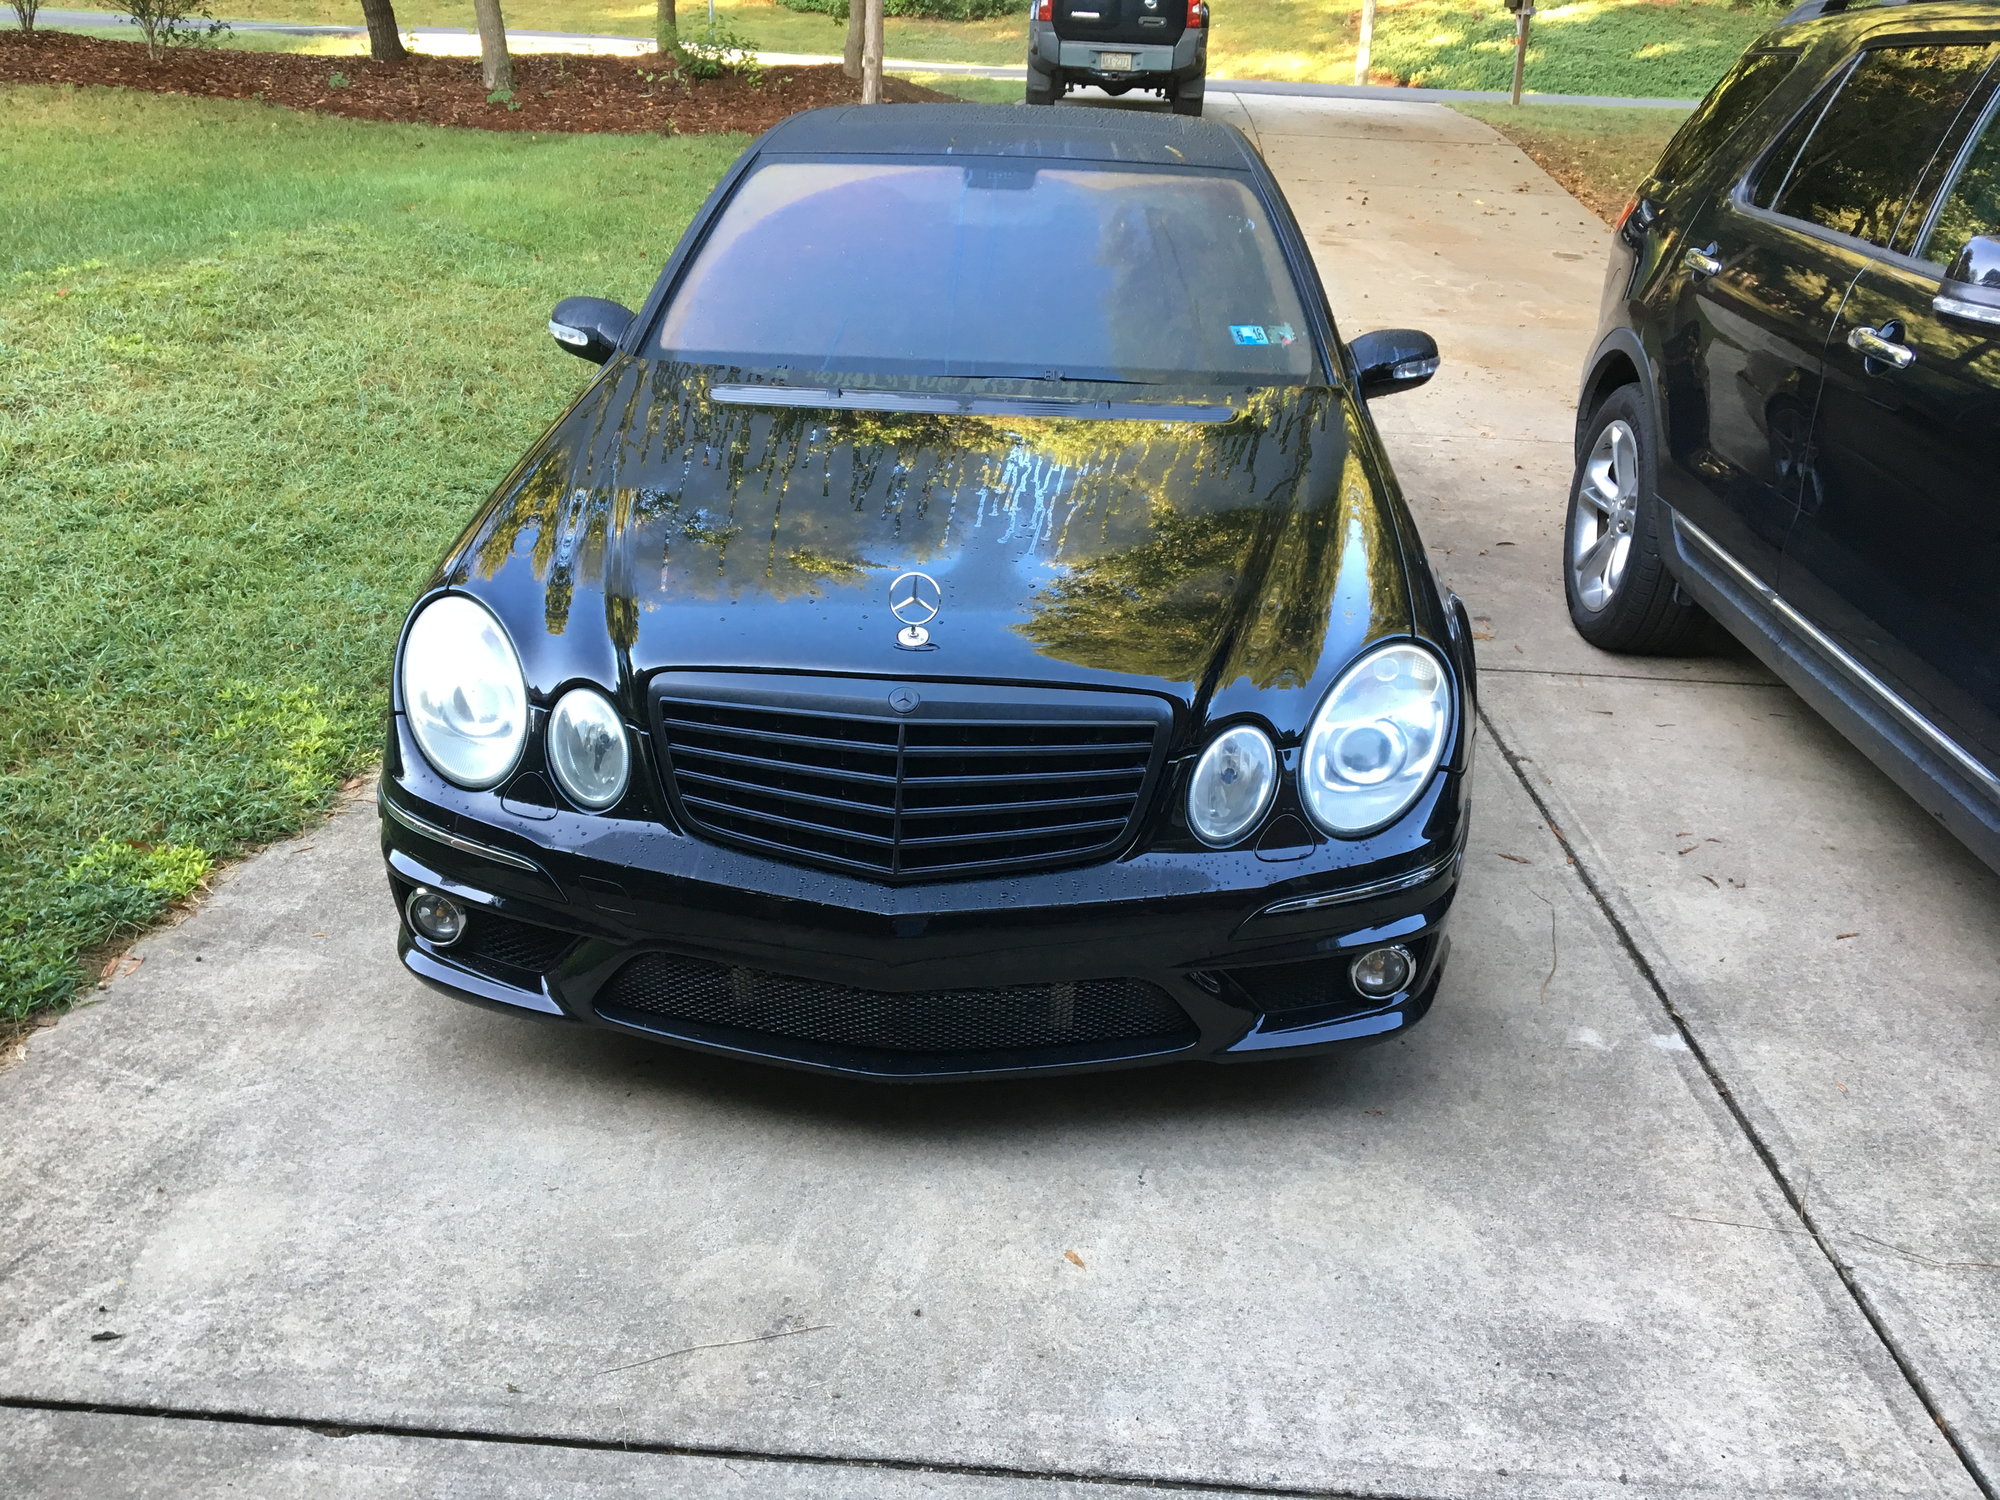 2005 Mercedes-Benz E55 AMG - 2005 E55 AMG for sale - Used - VIN WDBUF76J65A671455 - 113,500 Miles - 8 cyl - 2WD - Automatic - Sedan - Black - Charlotte, NC 28210, United States